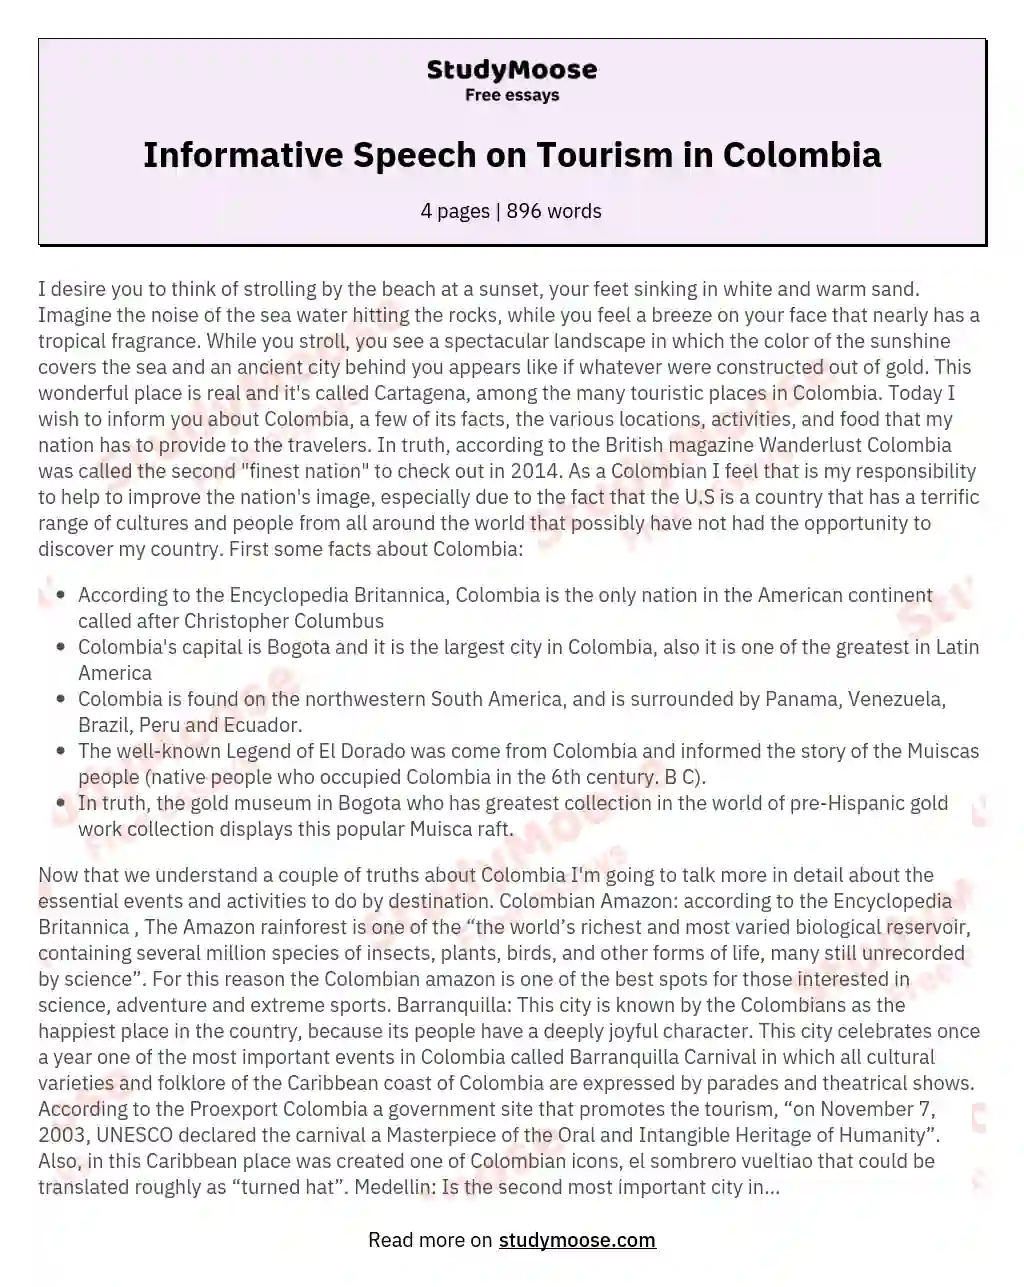 Informative Speech on Tourism in Colombia essay